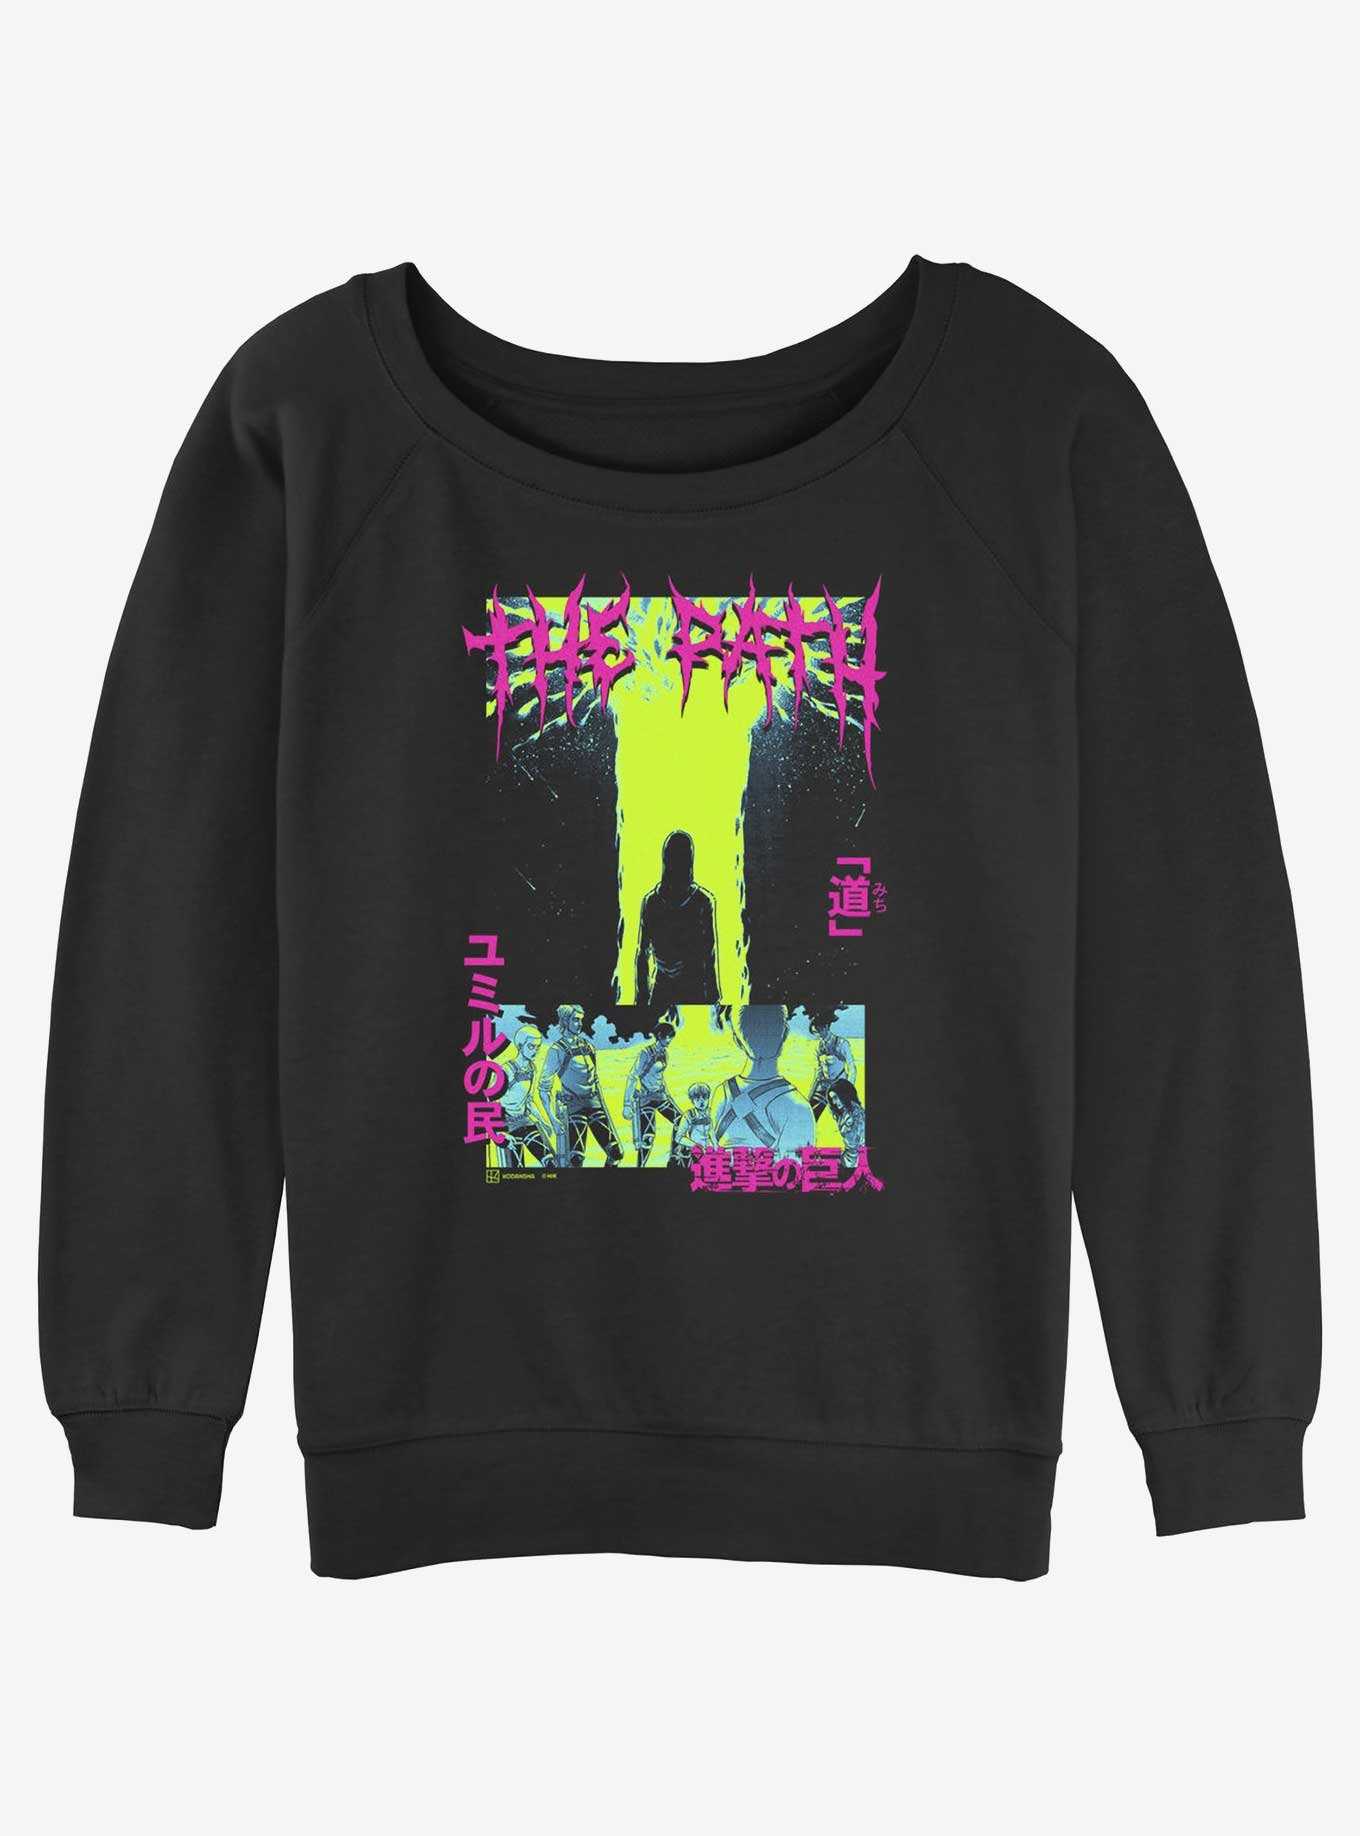 Attack on Titan The Path Poster Girls Slouchy Sweatshirt, , hi-res